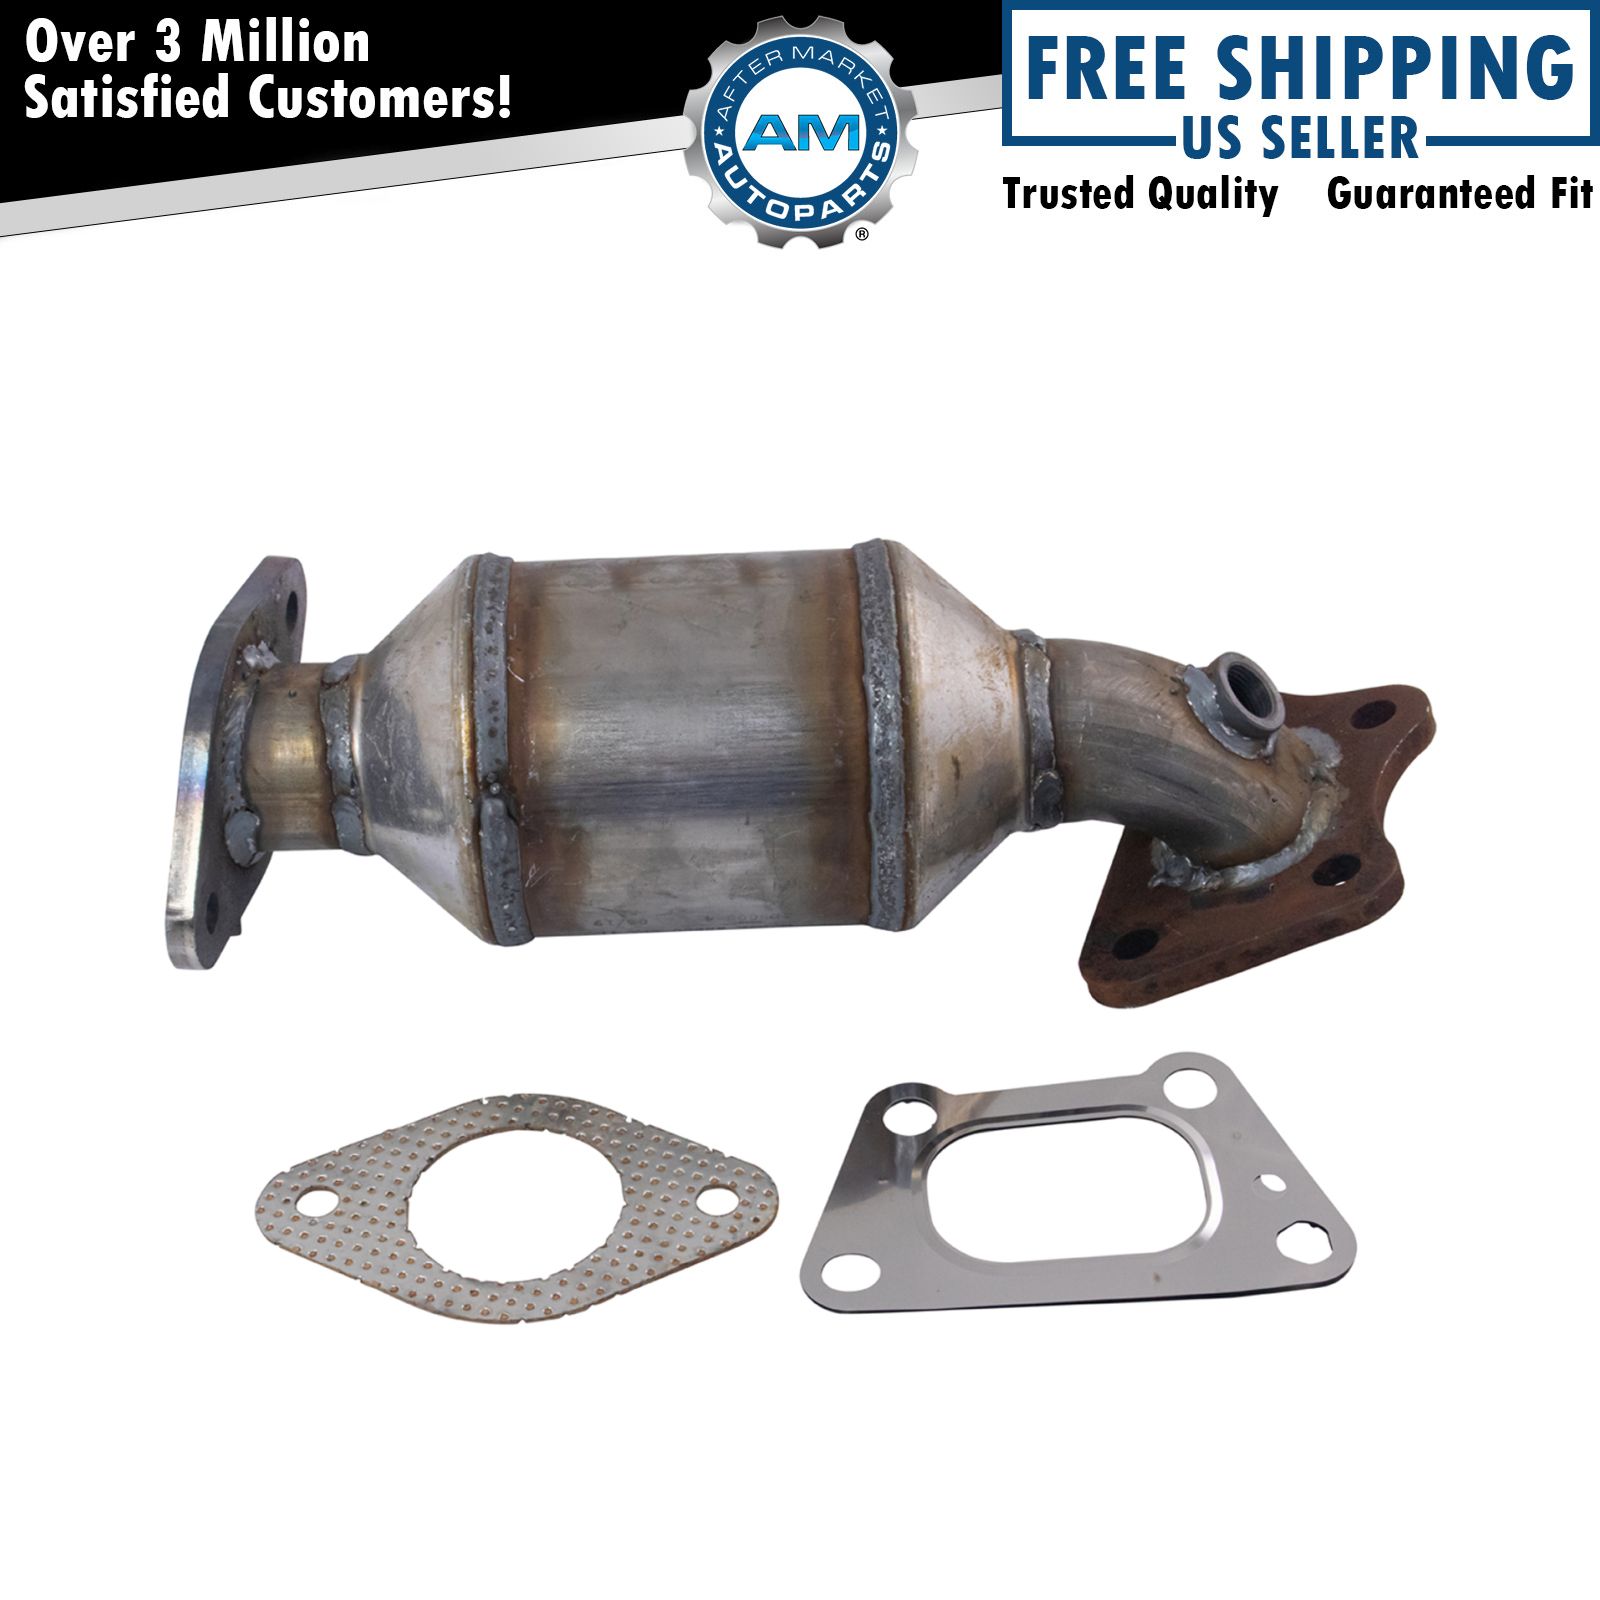 Rear Bank Firewall Side Catalytic Converter Assembly for Buick Allure Lacrosse